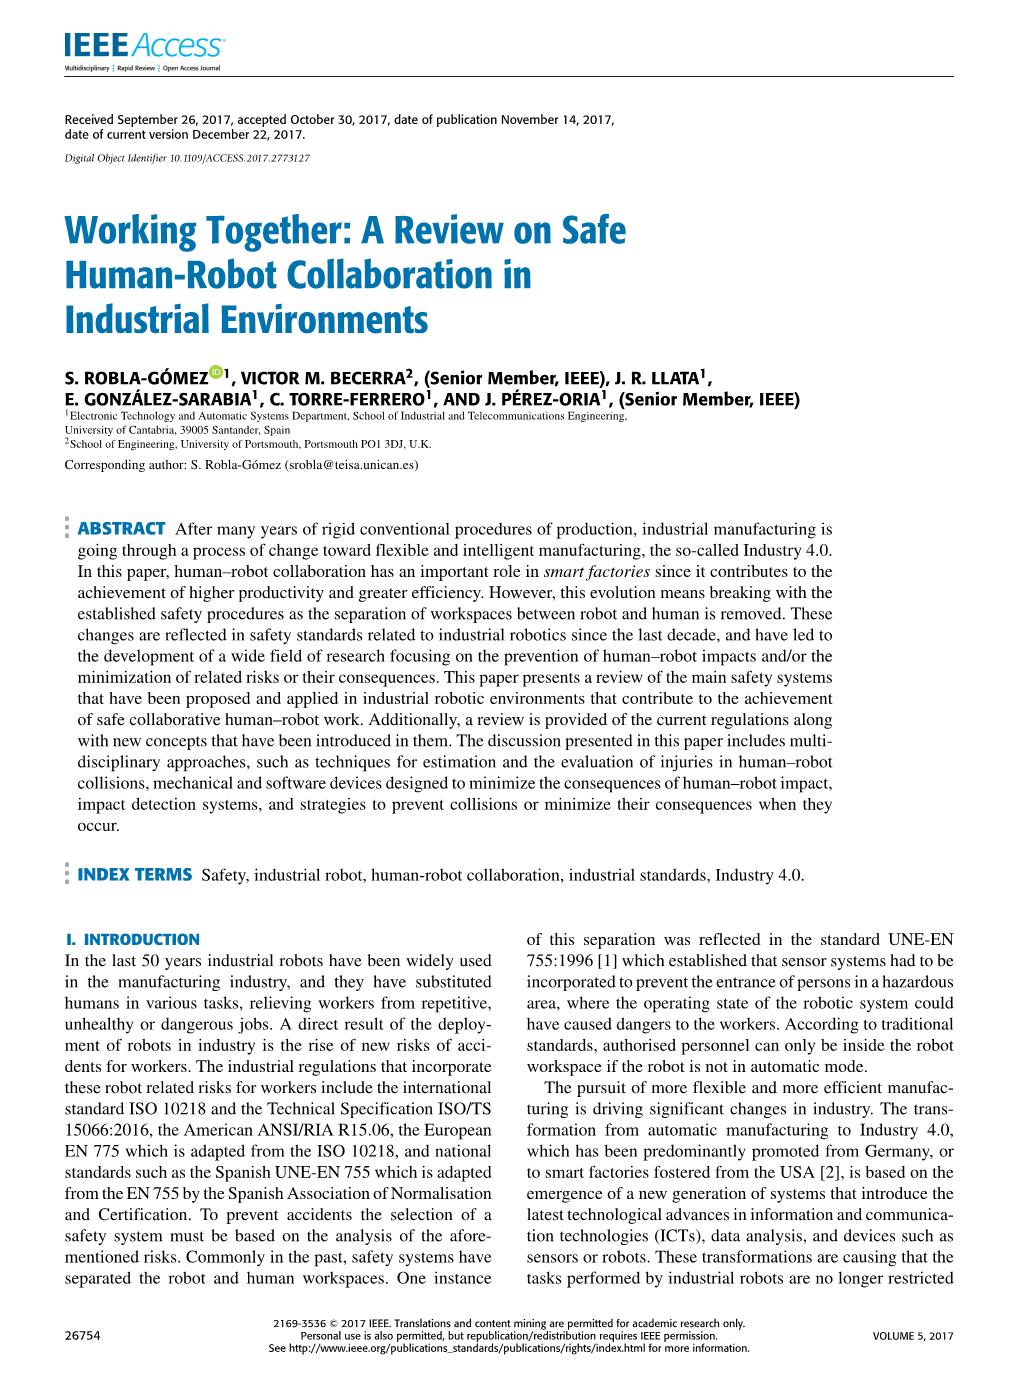 Working Together: a Review on Safe Human-Robot Collaboration in Industrial Environments